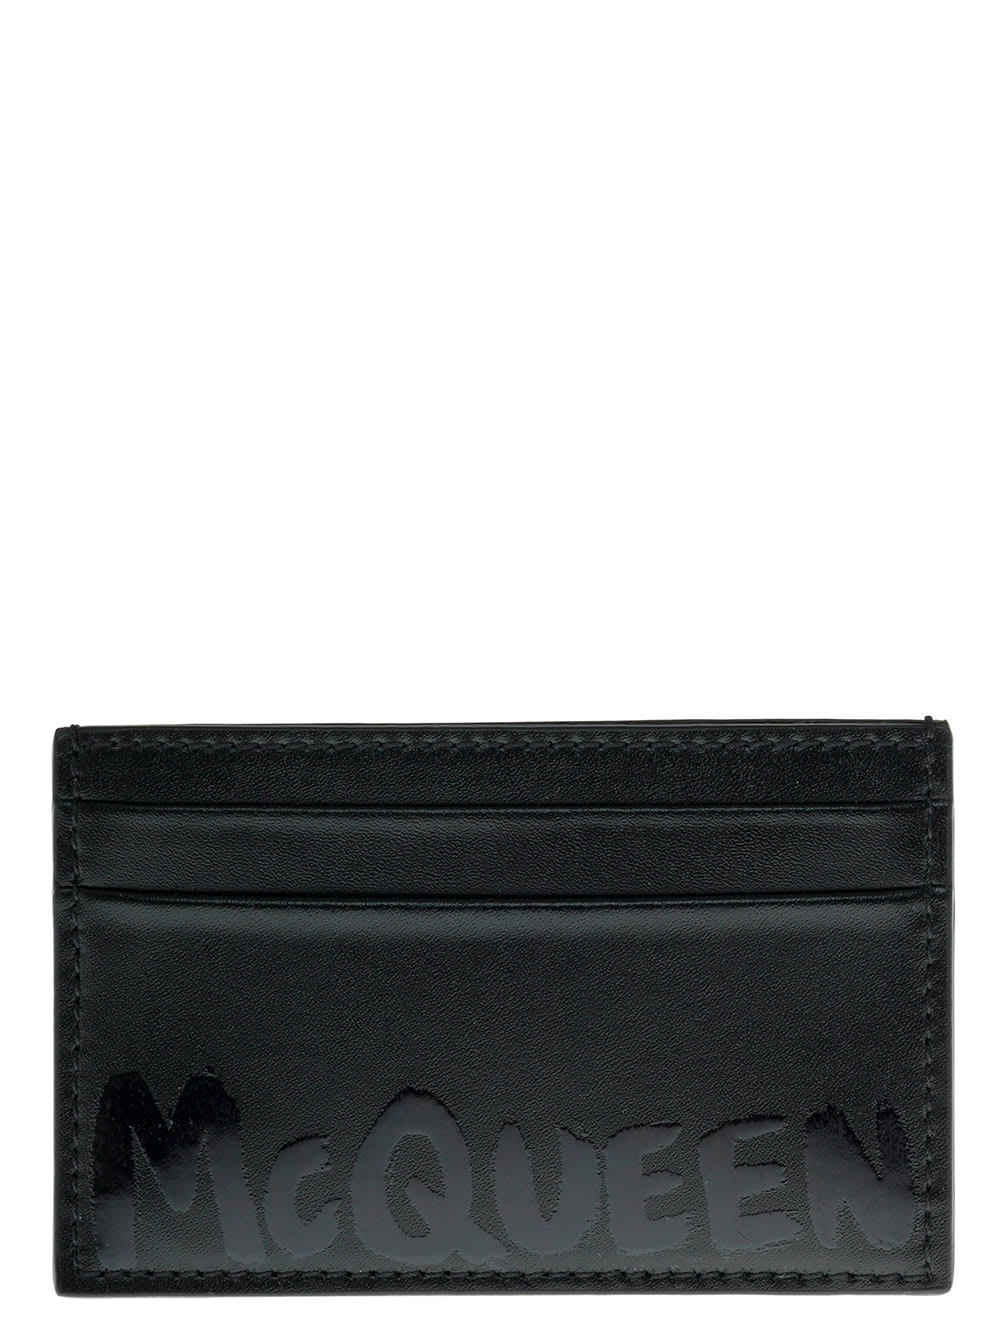 Alexander McQueen Black Leather Card Holder With Logo